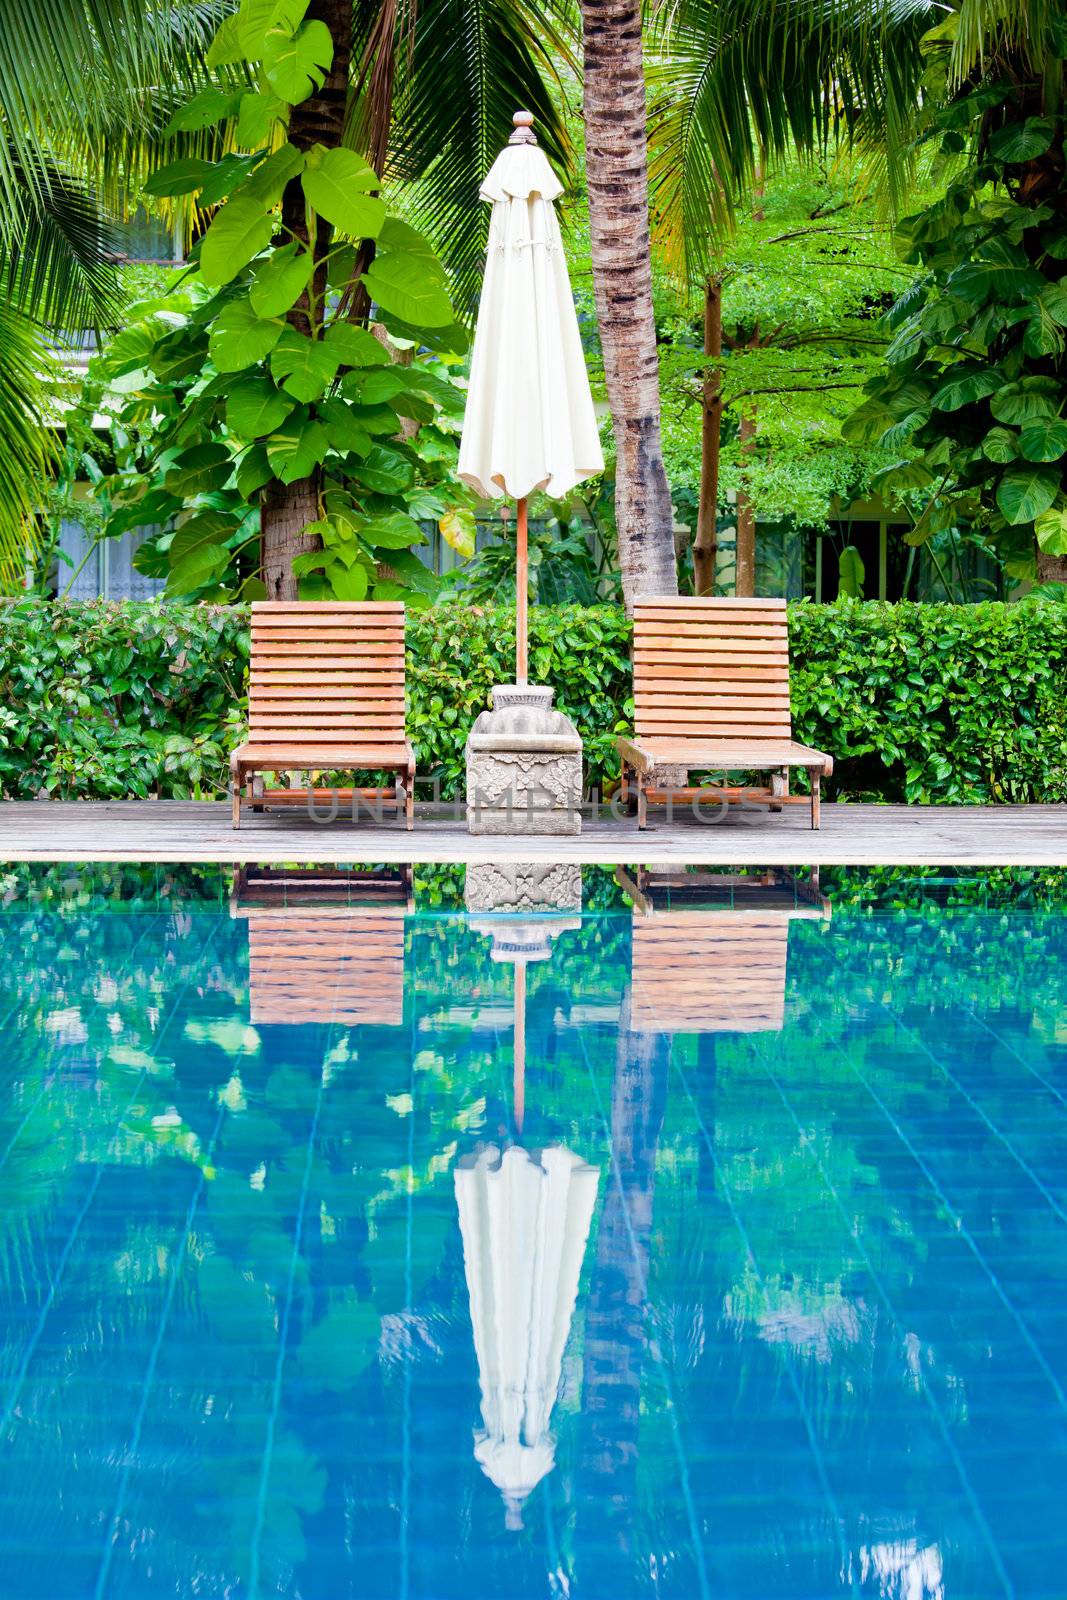 Swimming pool in the resort of Thailand